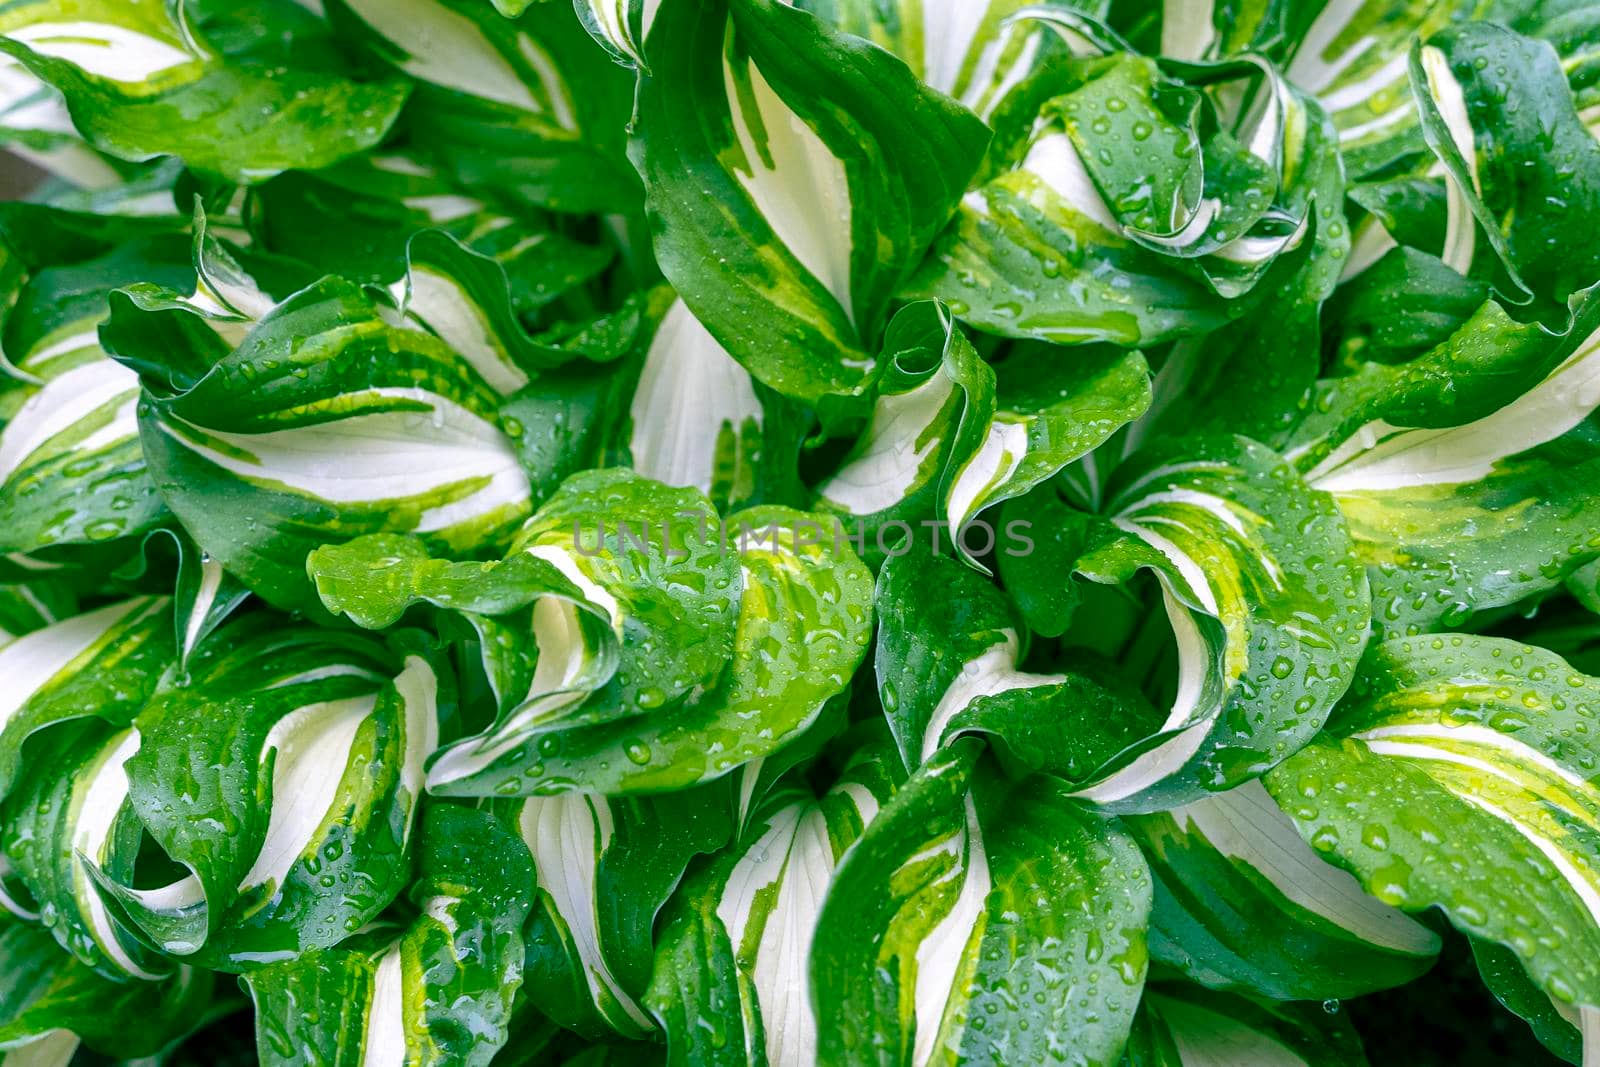 Background texture of green fresh Hosta leaves with raindrops by audiznam2609